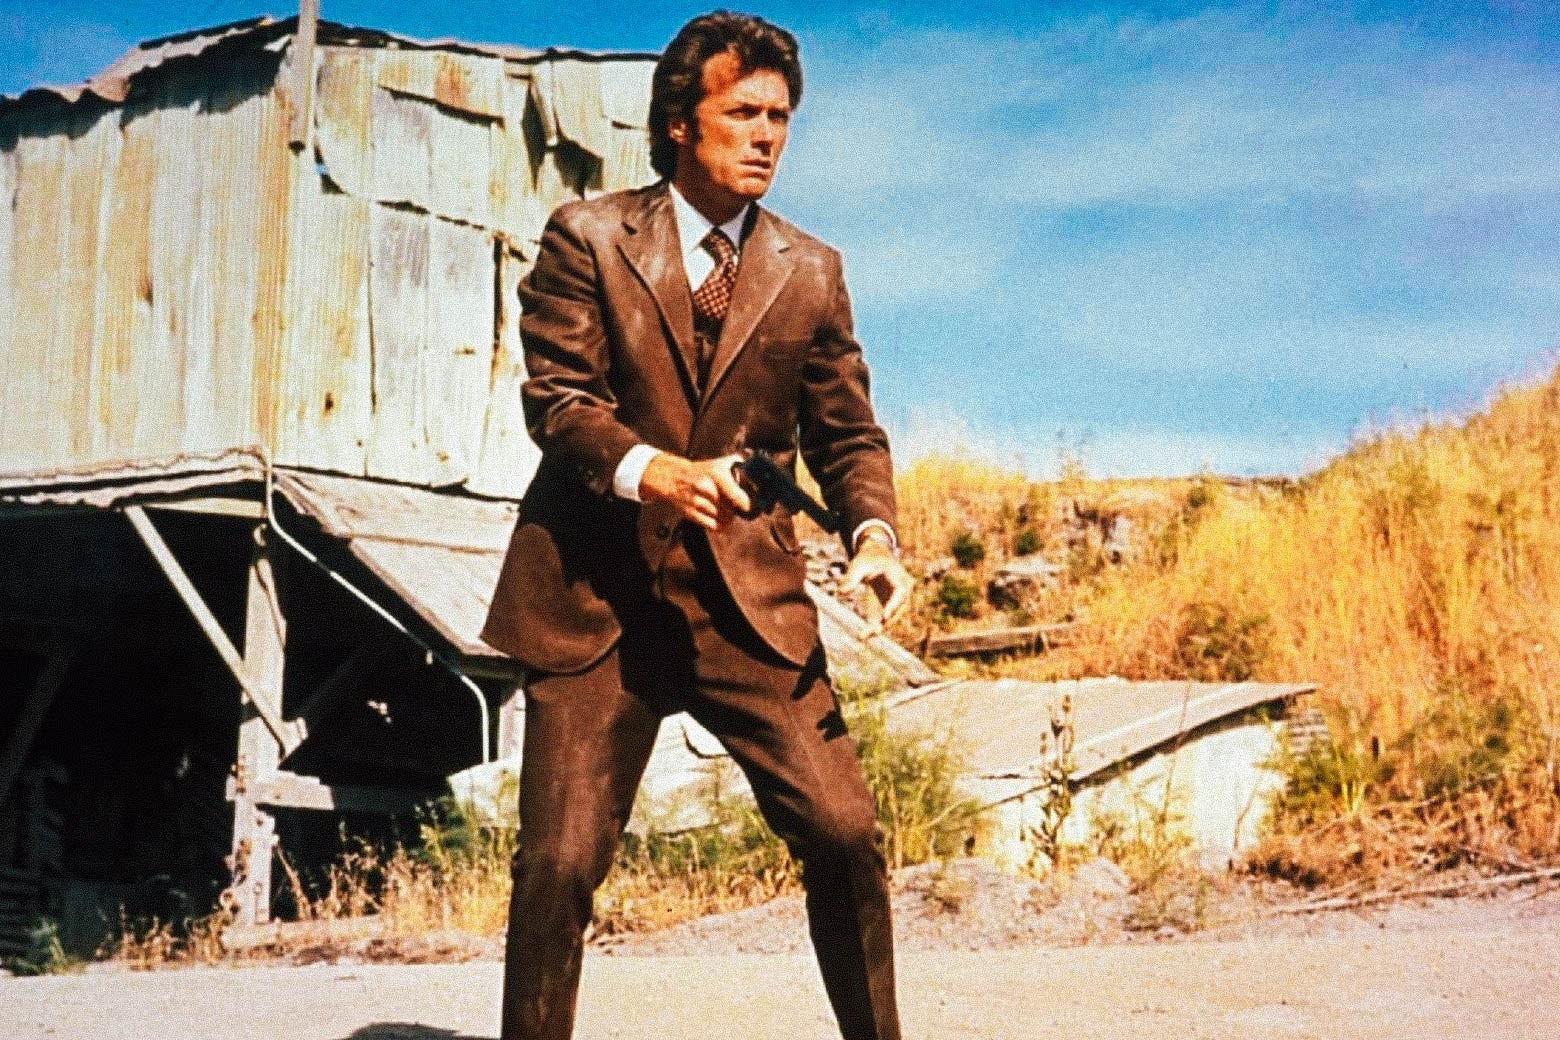 Clint Eastwood as Dirty Harry, standing outside, holding a handgun